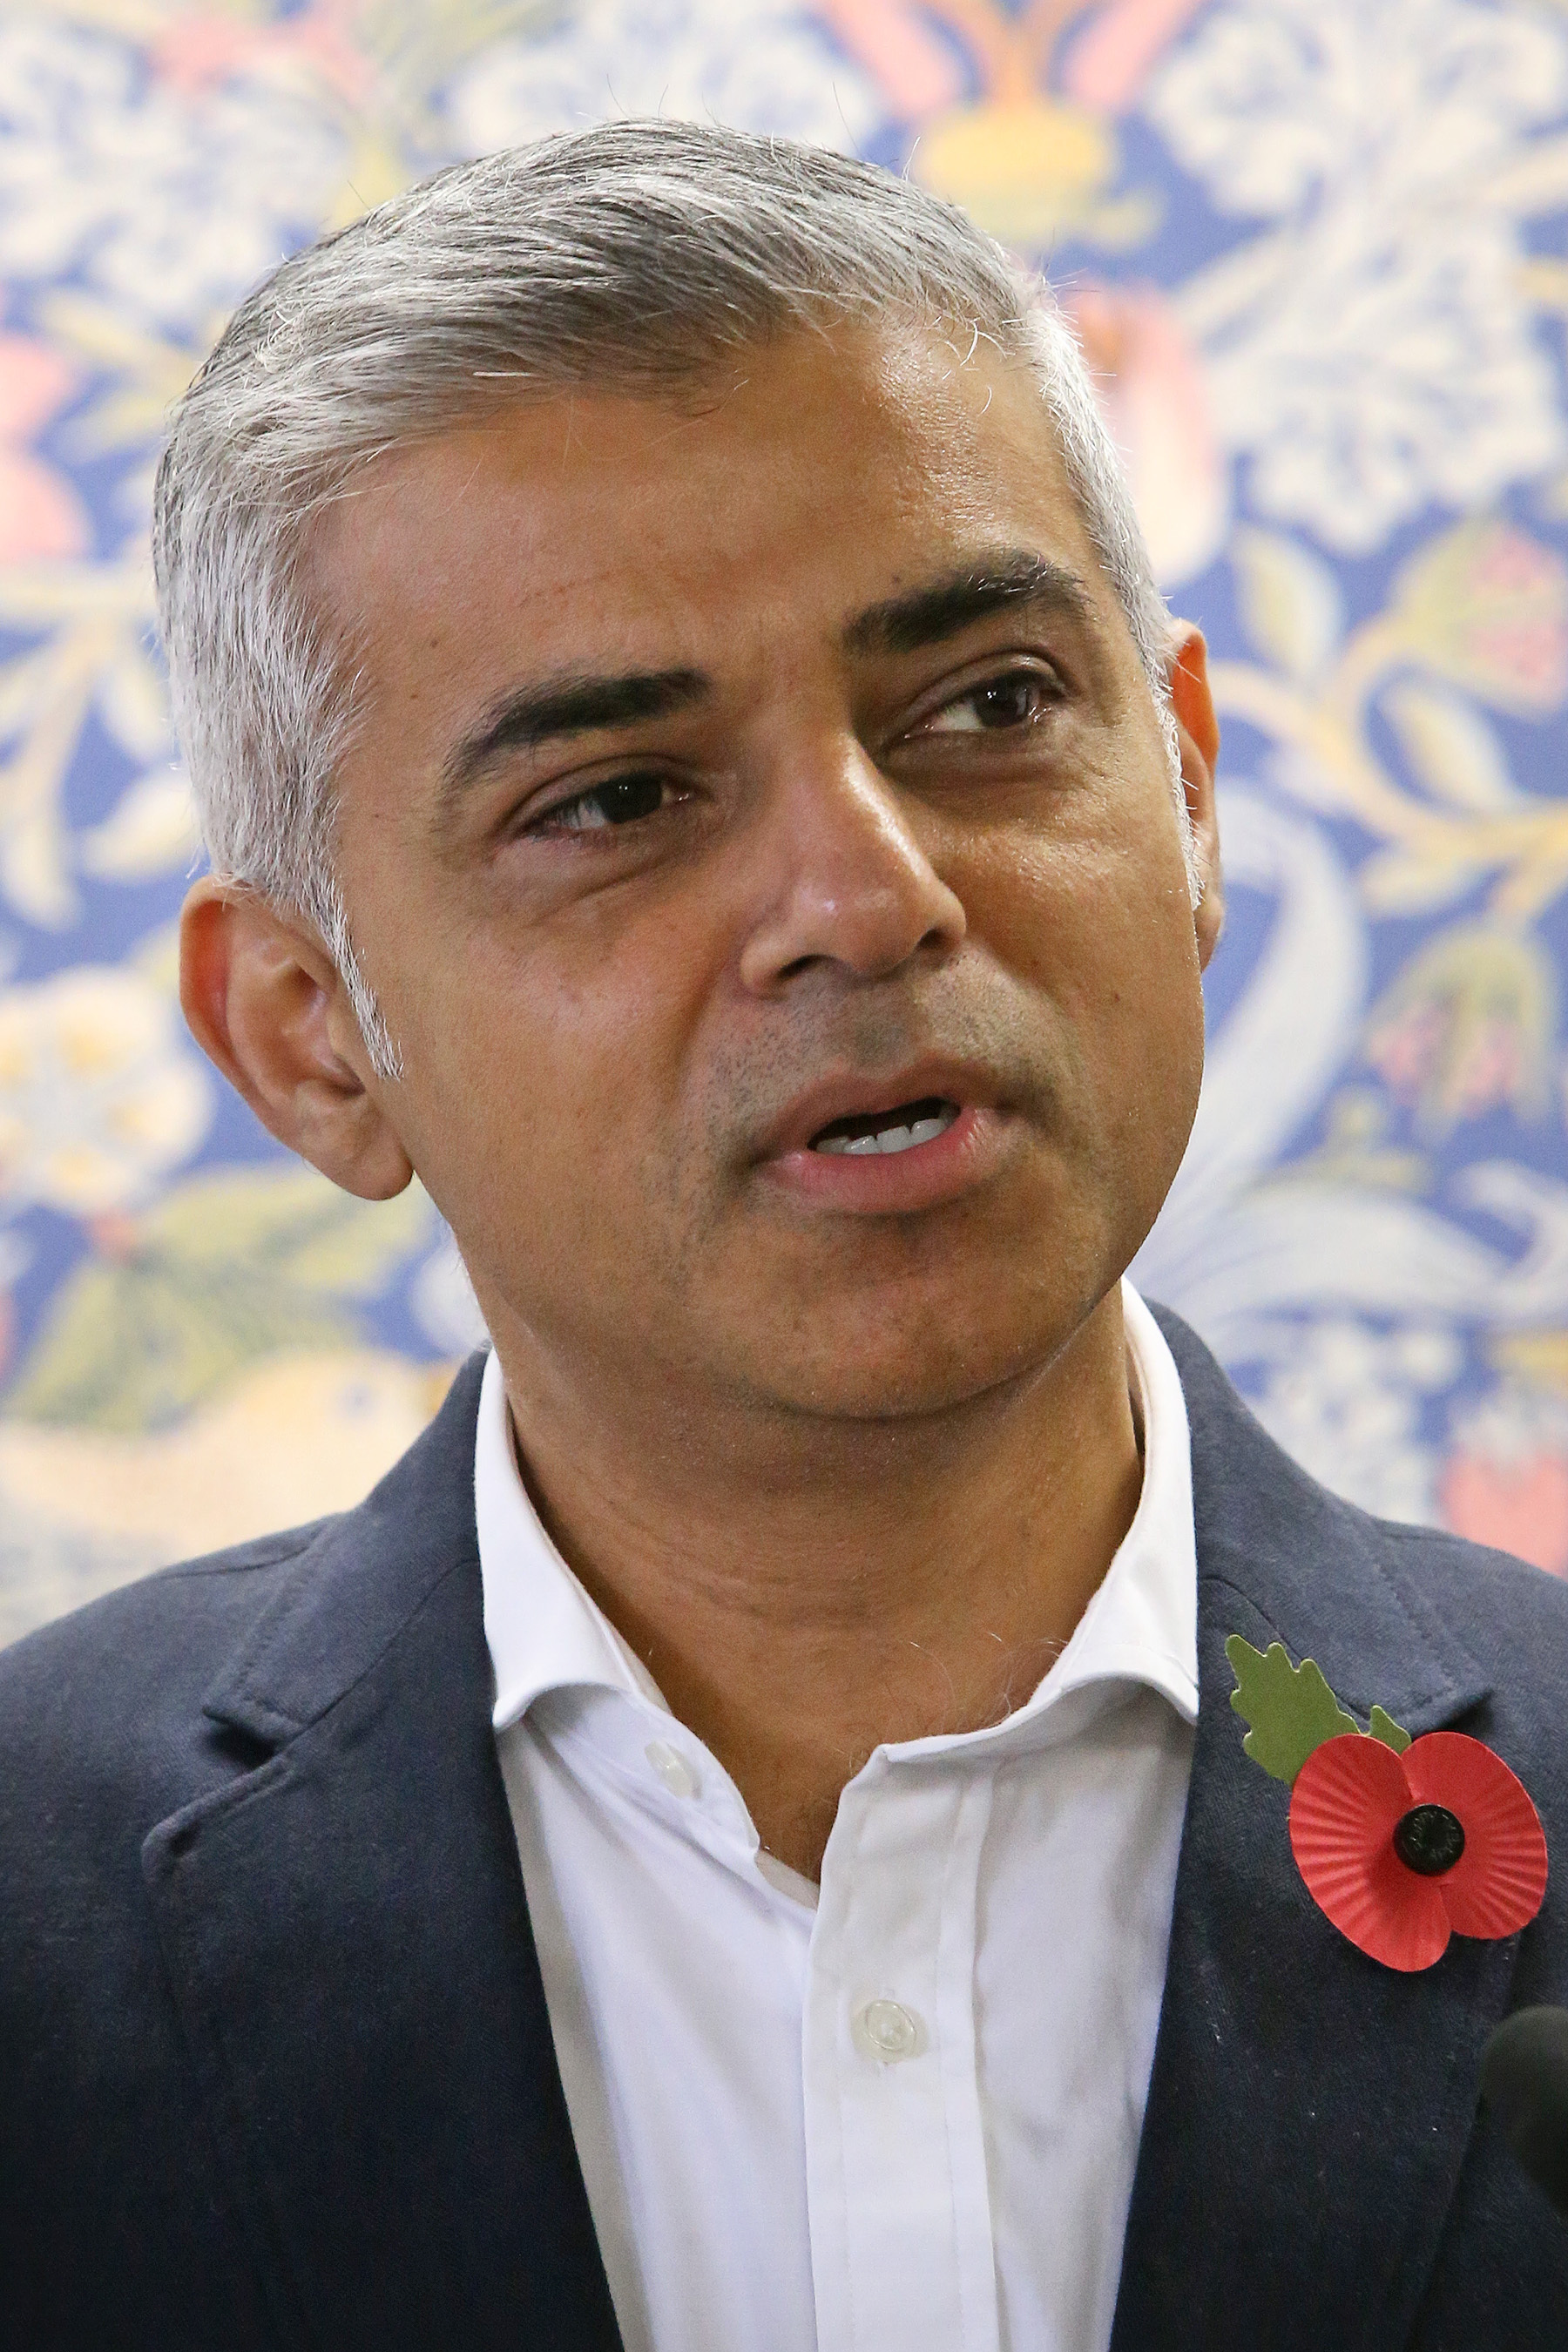 Mayor Of London promises to take knife crime in Harrow ‘extremely seriously’